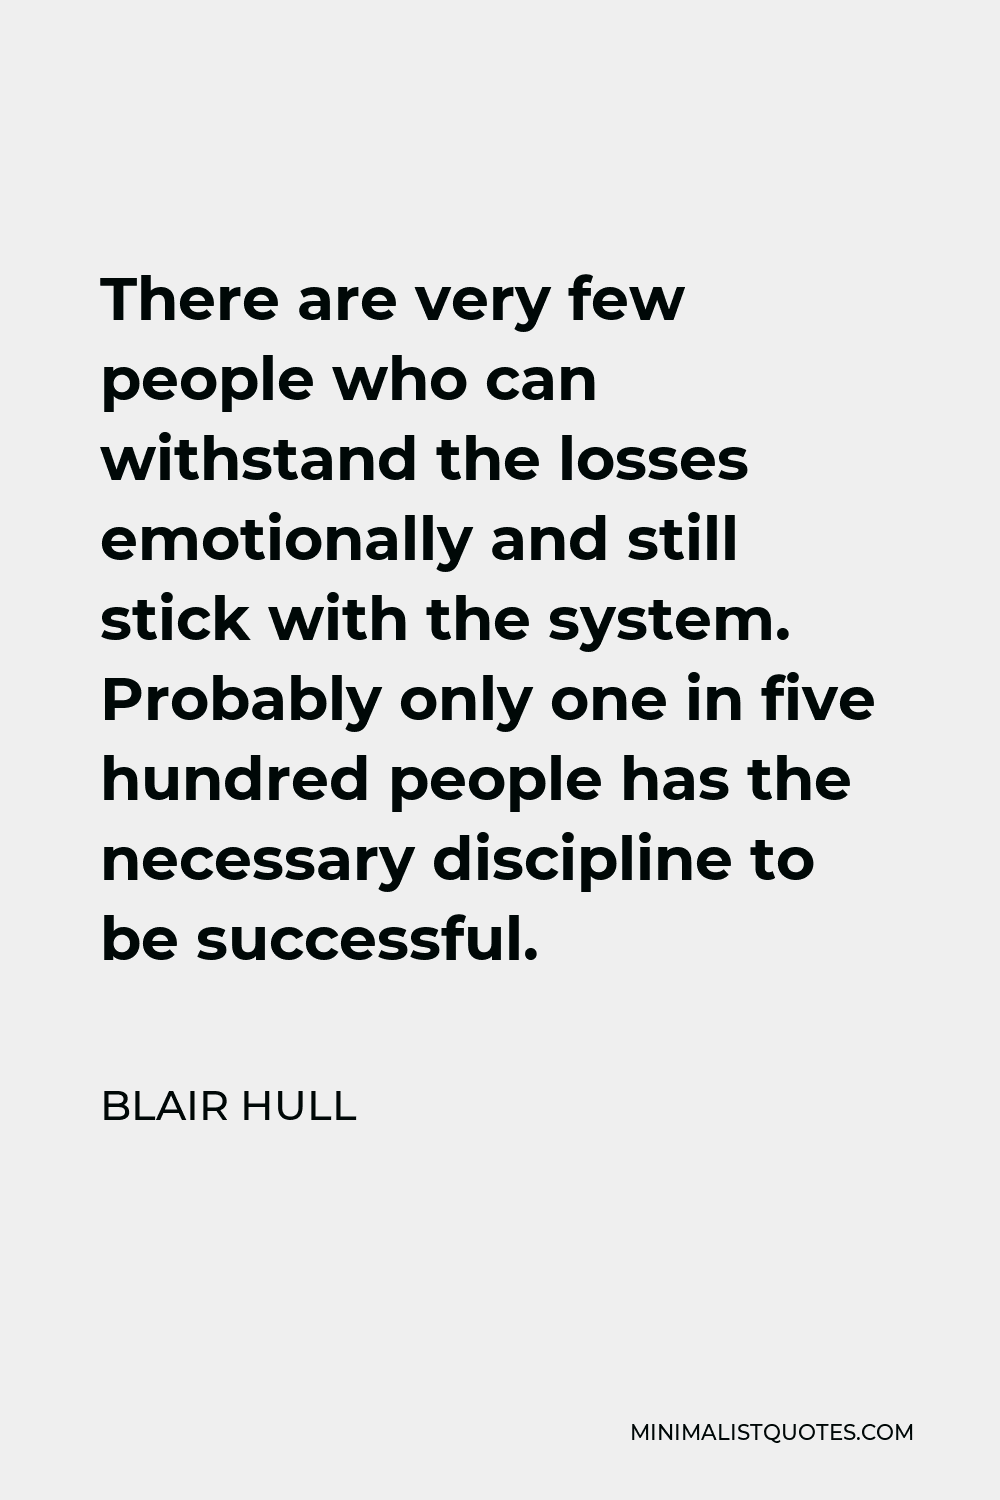 Blair Hull Quote - There are very few people who can withstand the losses emotionally and still stick with the system. Probably only one in five hundred people has the necessary discipline to be successful.